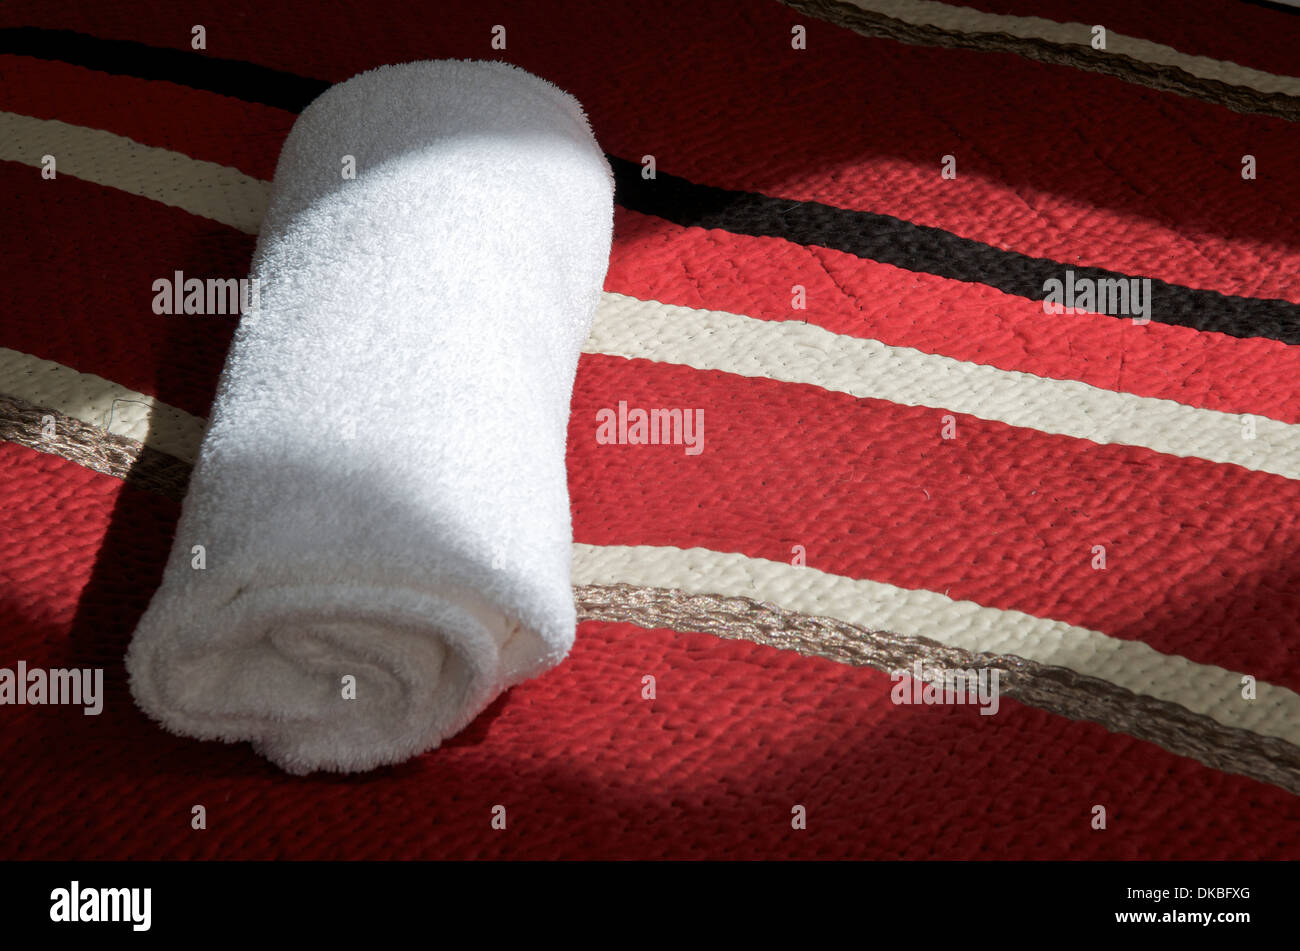 Rolled white towel on bed. Stock Photo